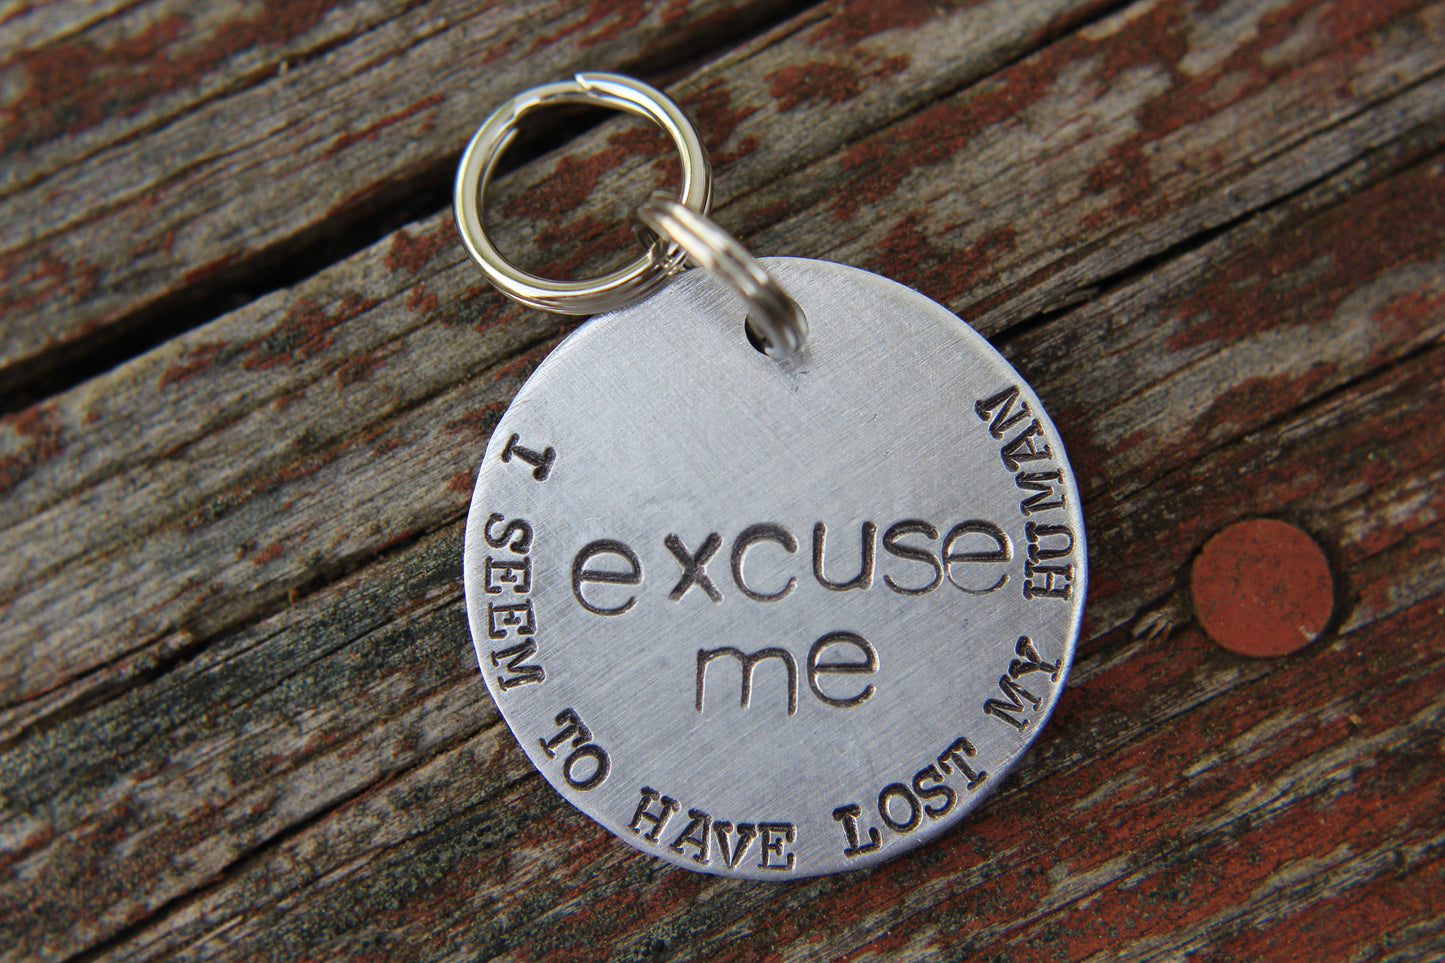 Custom Hand Stamped Dog ID Tag,Excuse Me, Personalized Dog Tag, Tag for Dog, Copper Dog Tag, Aluminum Pet ID Tag, Pet ID Tag with heart